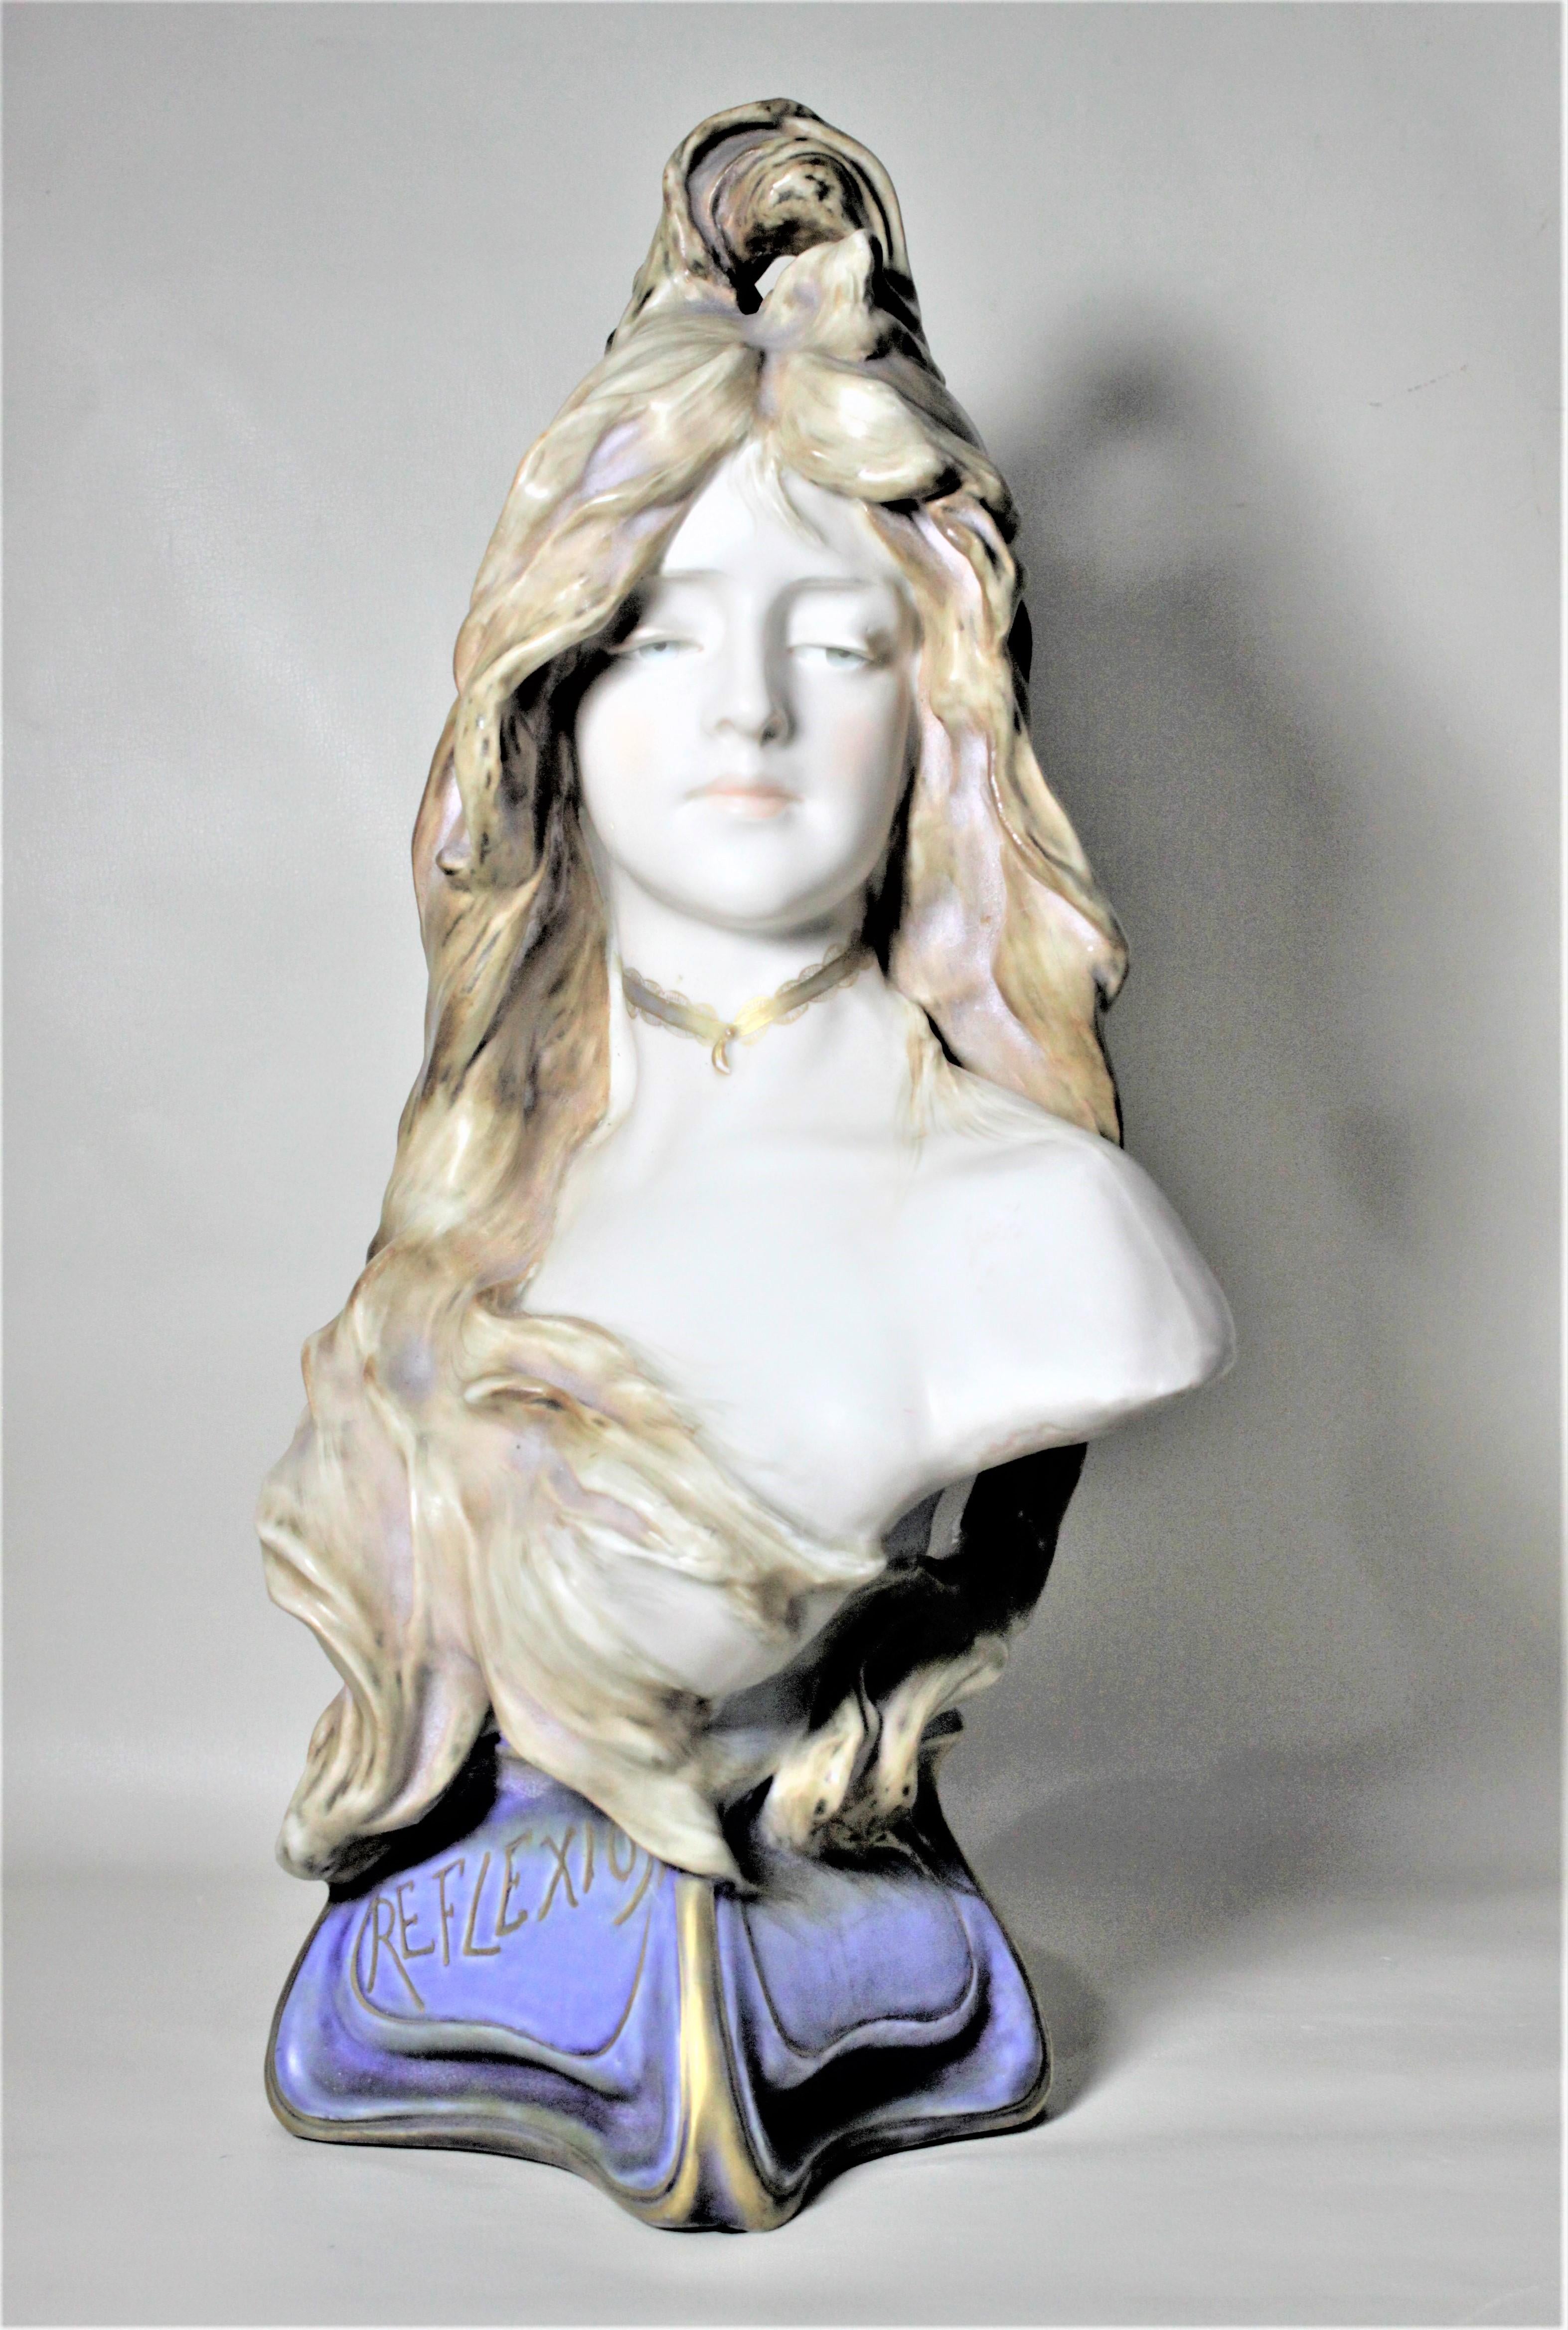 This large porcelain sculpture of a young female was produced by the Teplitz factory of Bohemia in the period and style of Art Nouveau. The bust depicts a young female in contemplation and entitled 